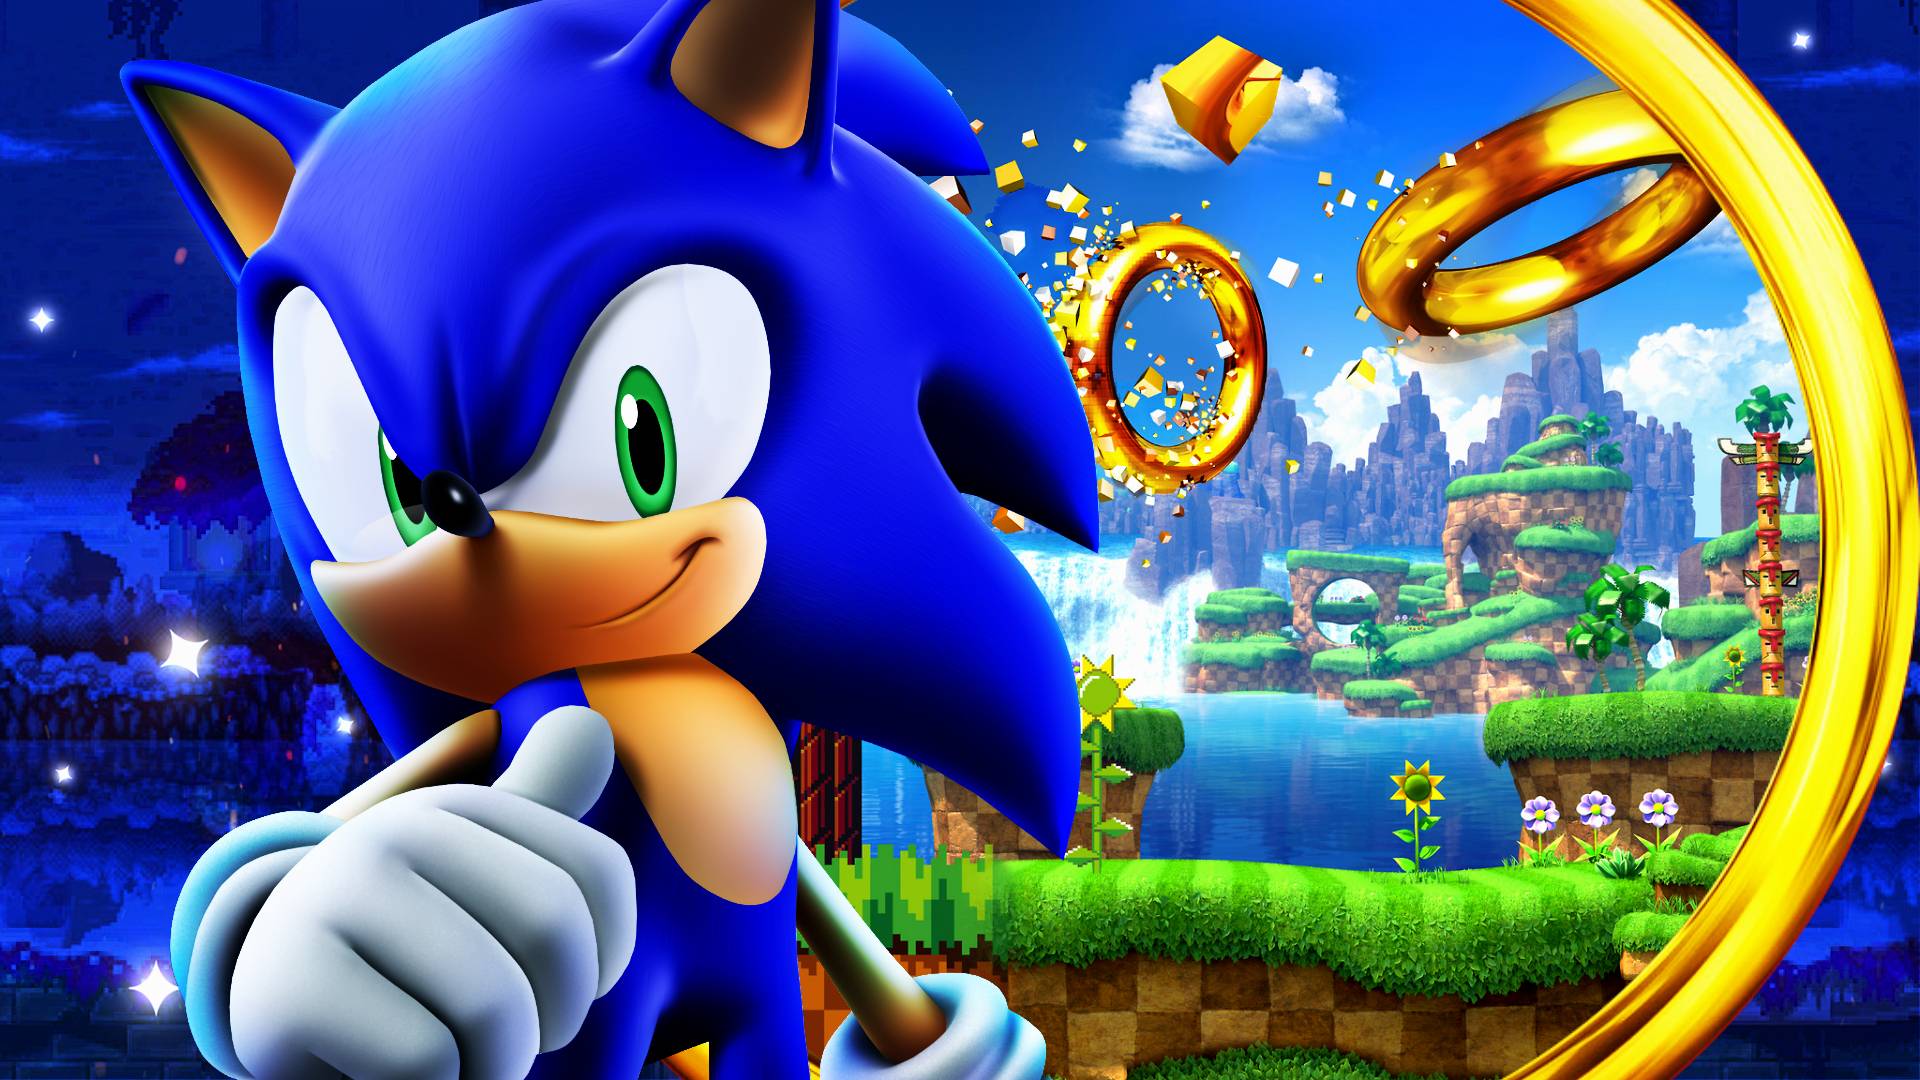 New sonic wallpaper for pc by sonicluminous on